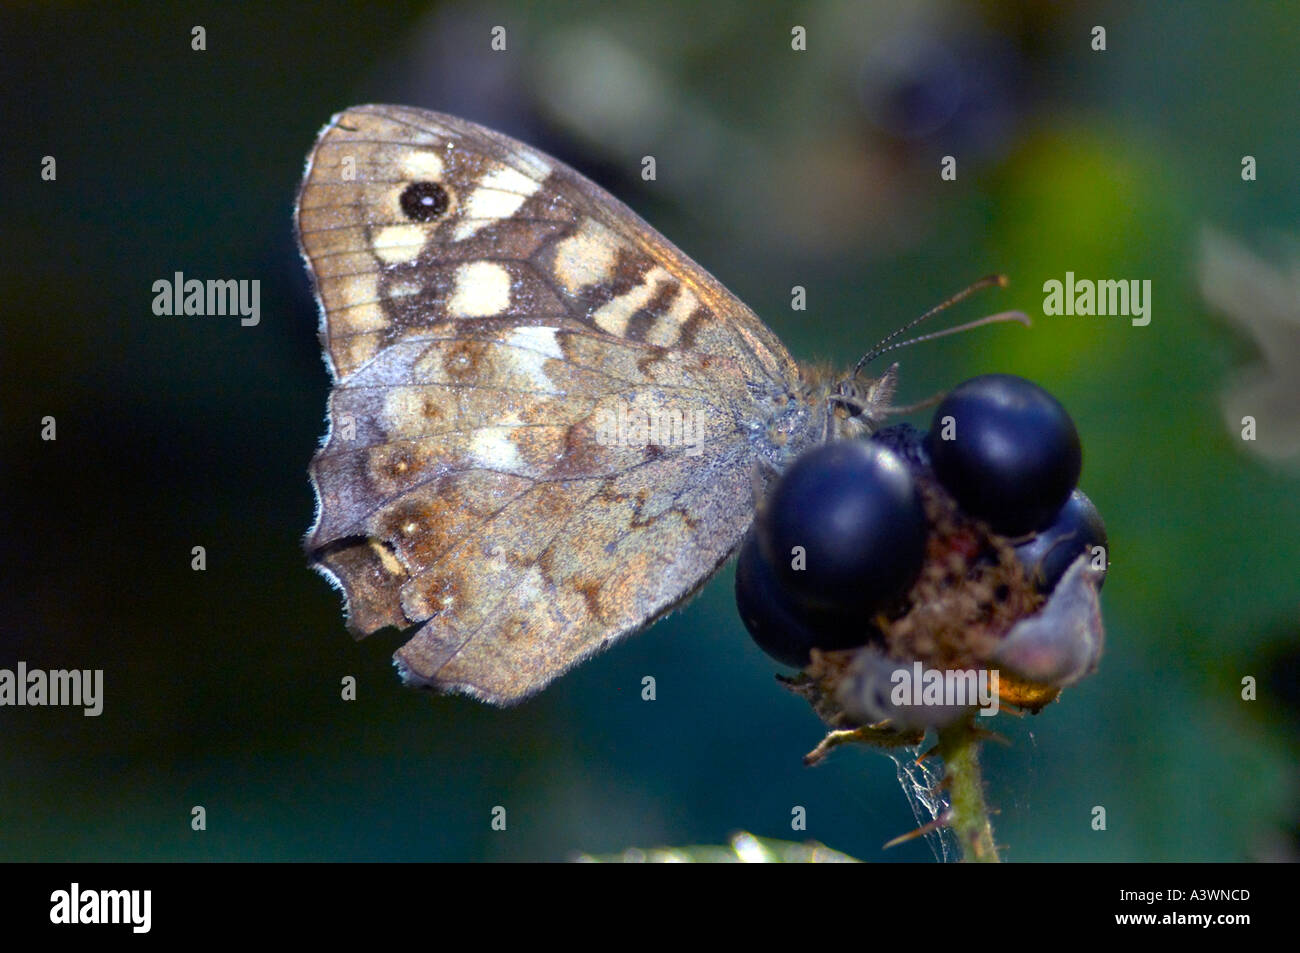 A Speckled Wood Pararge aegeria butterfly feeds on a fermenting blackberry in Epping Forest UK Stock Photo